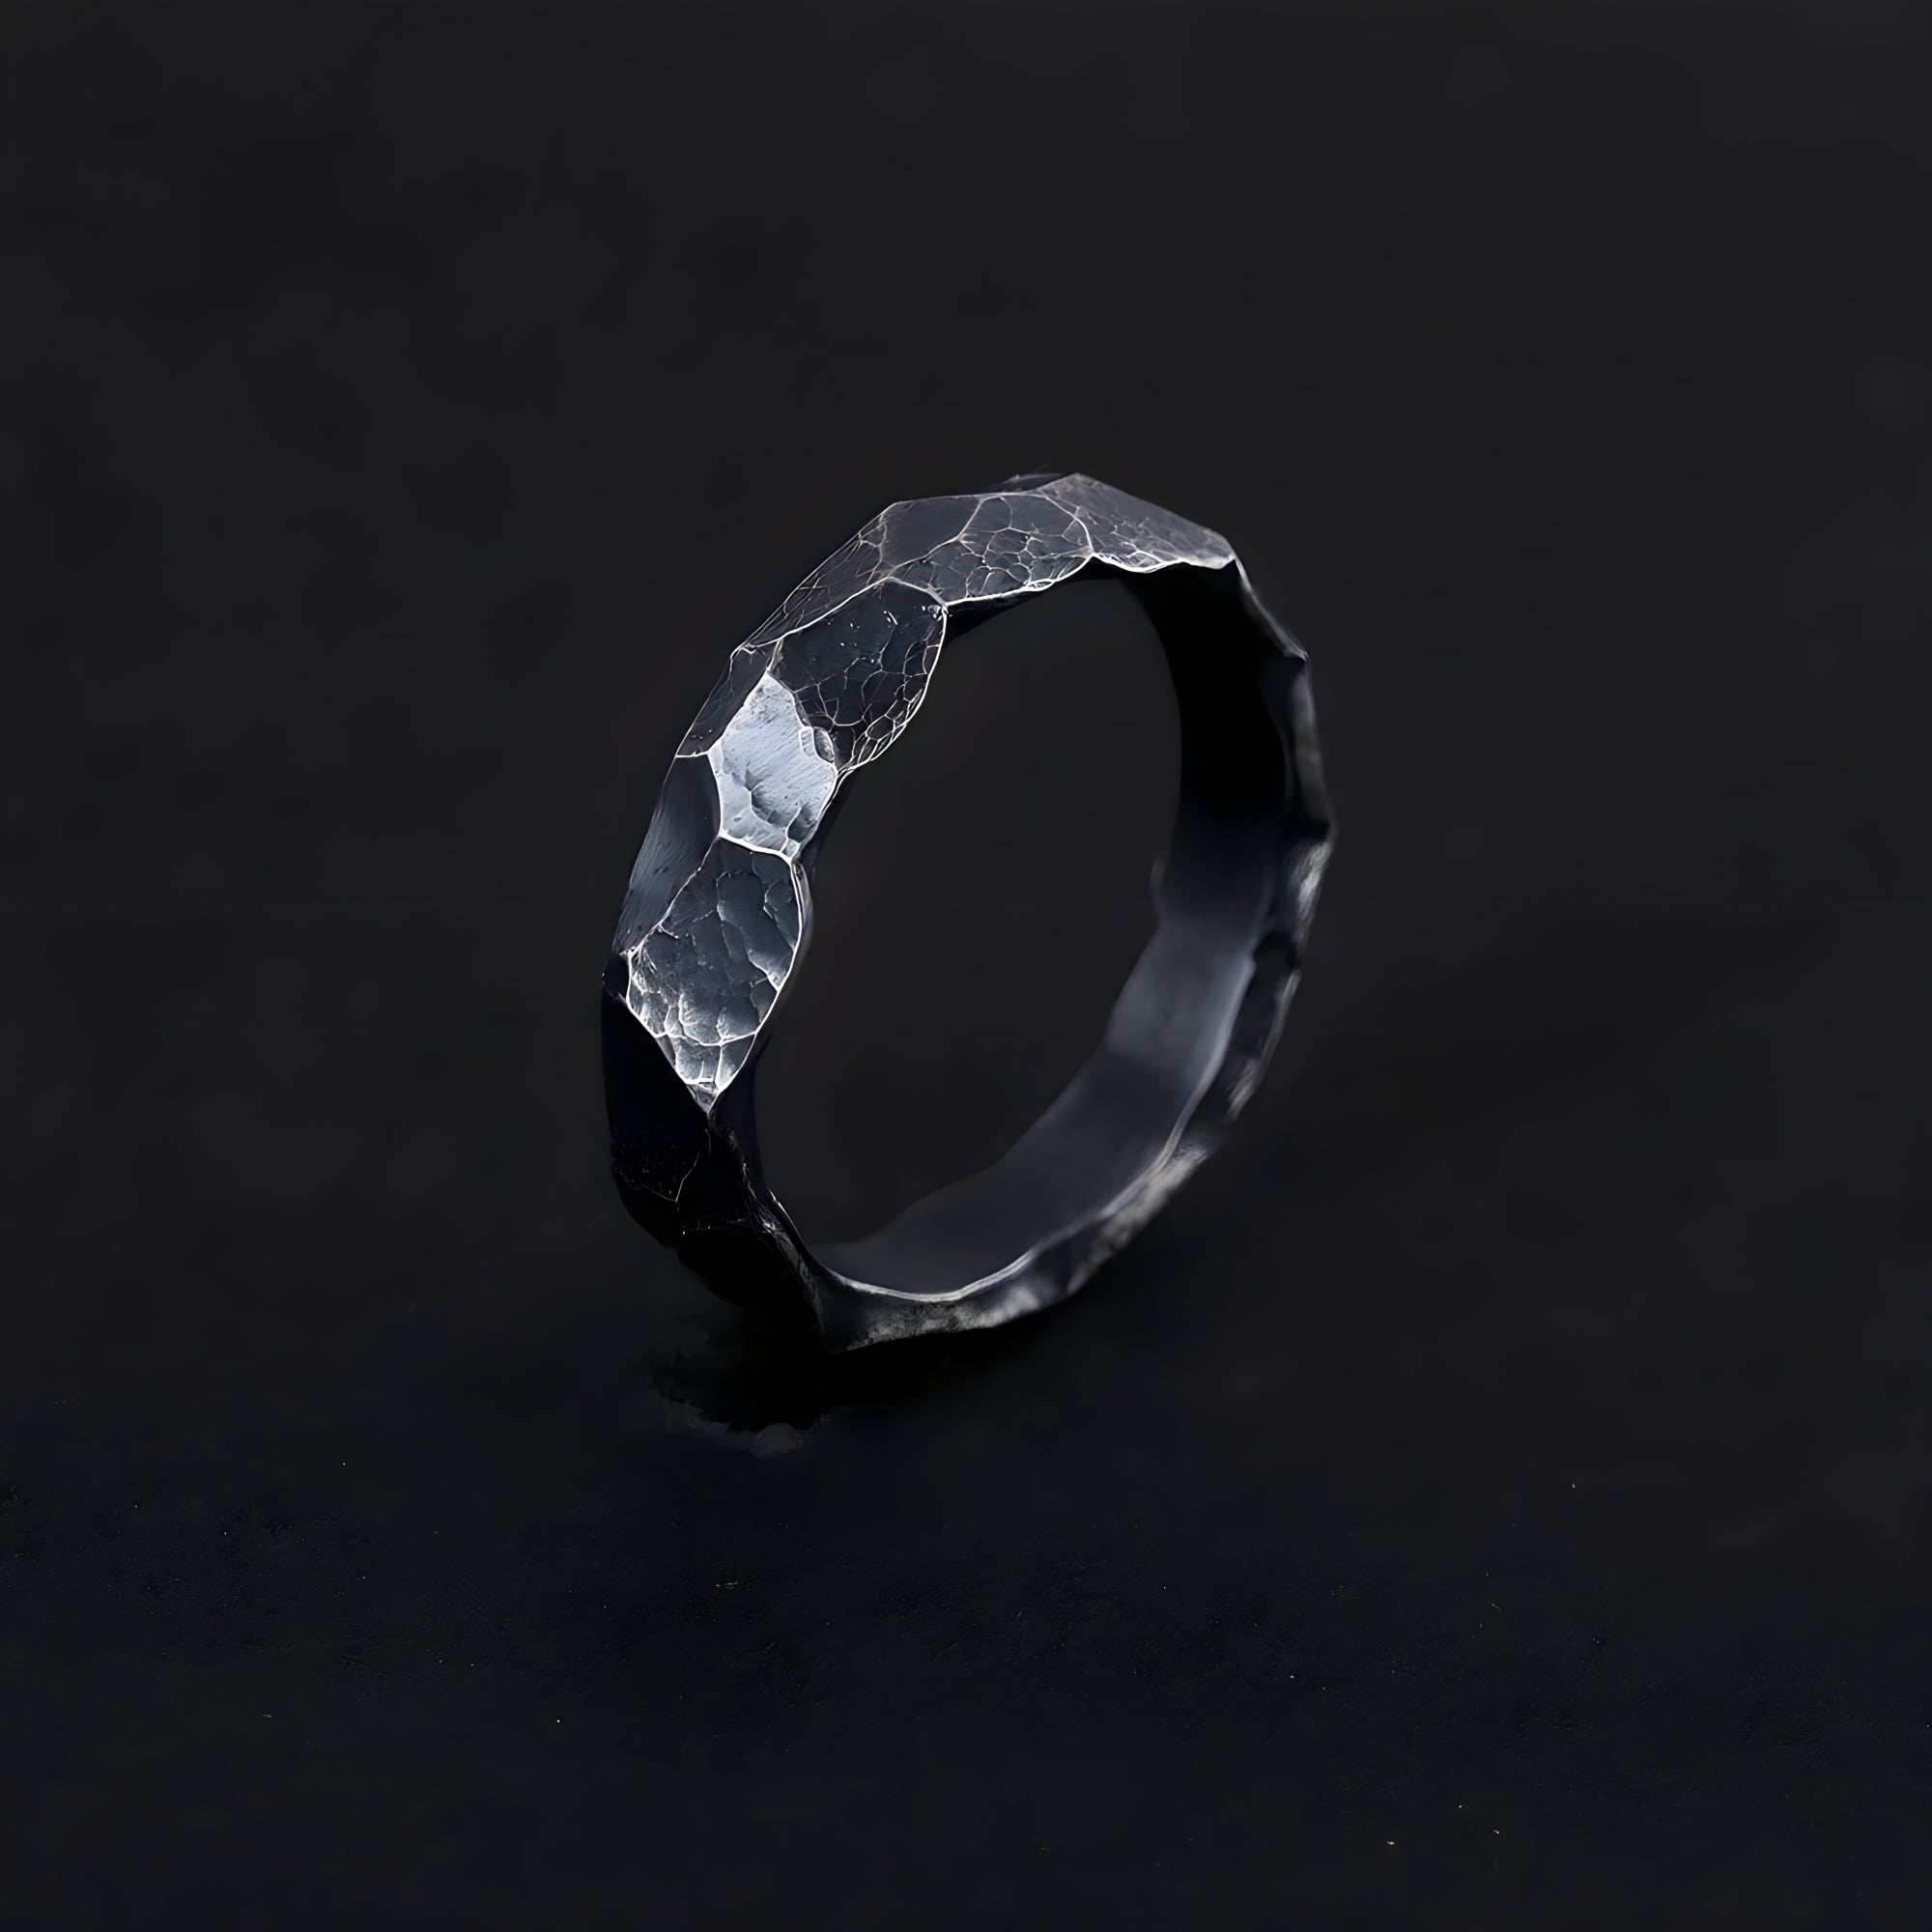 Nocturnal Ring